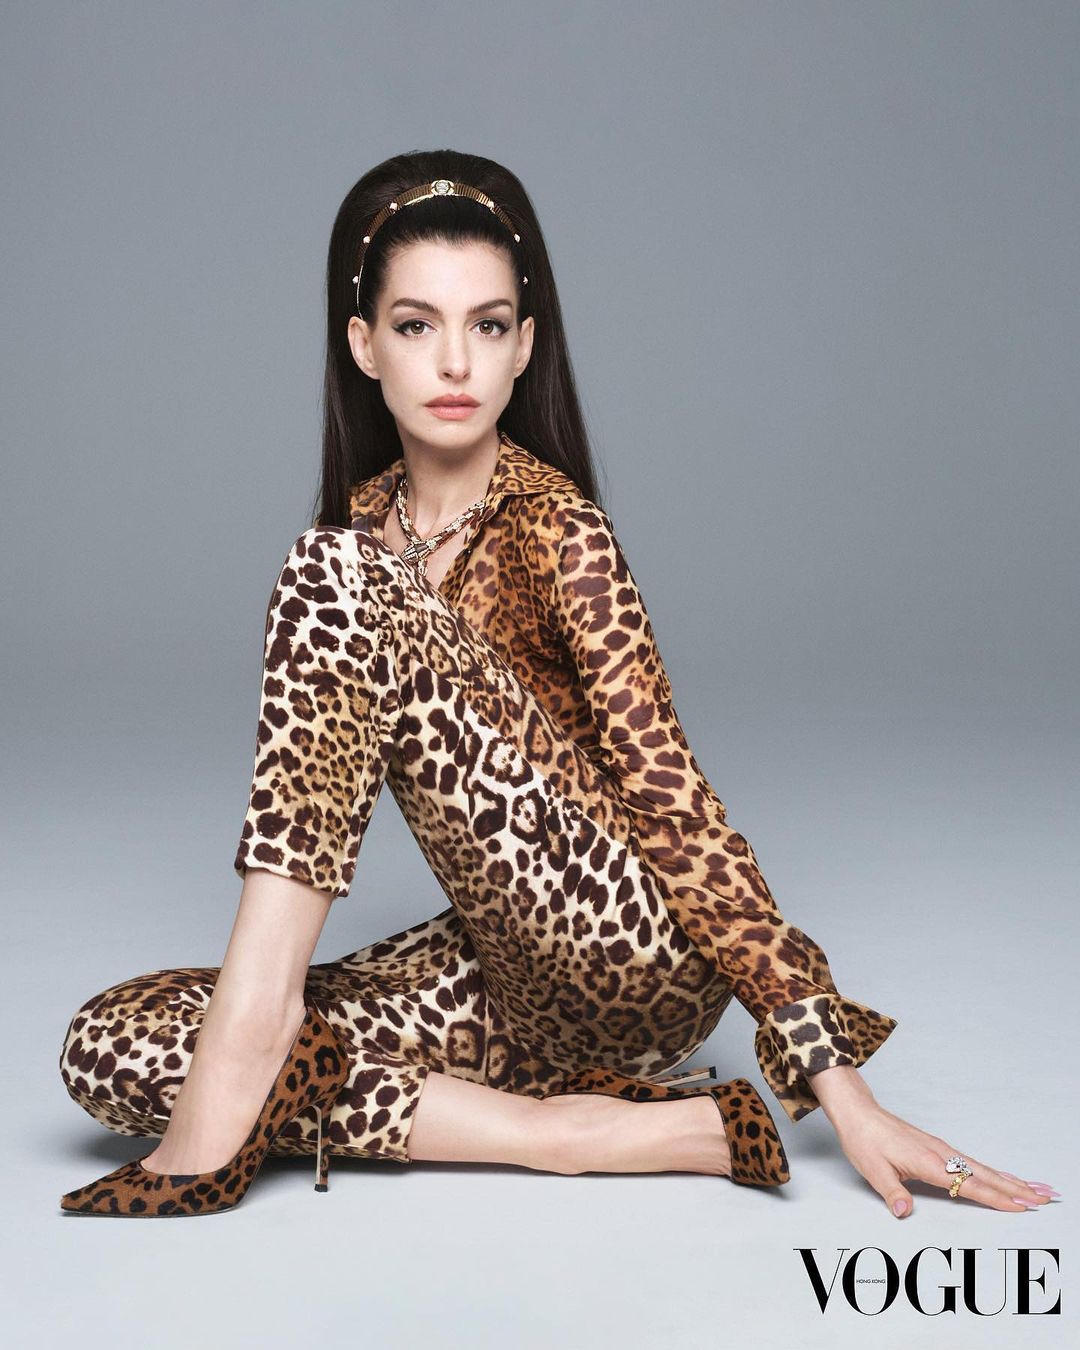 Anne Hathaway Cover Photo Shoot for Vogue Hong Kong Magazine, Oct 2022